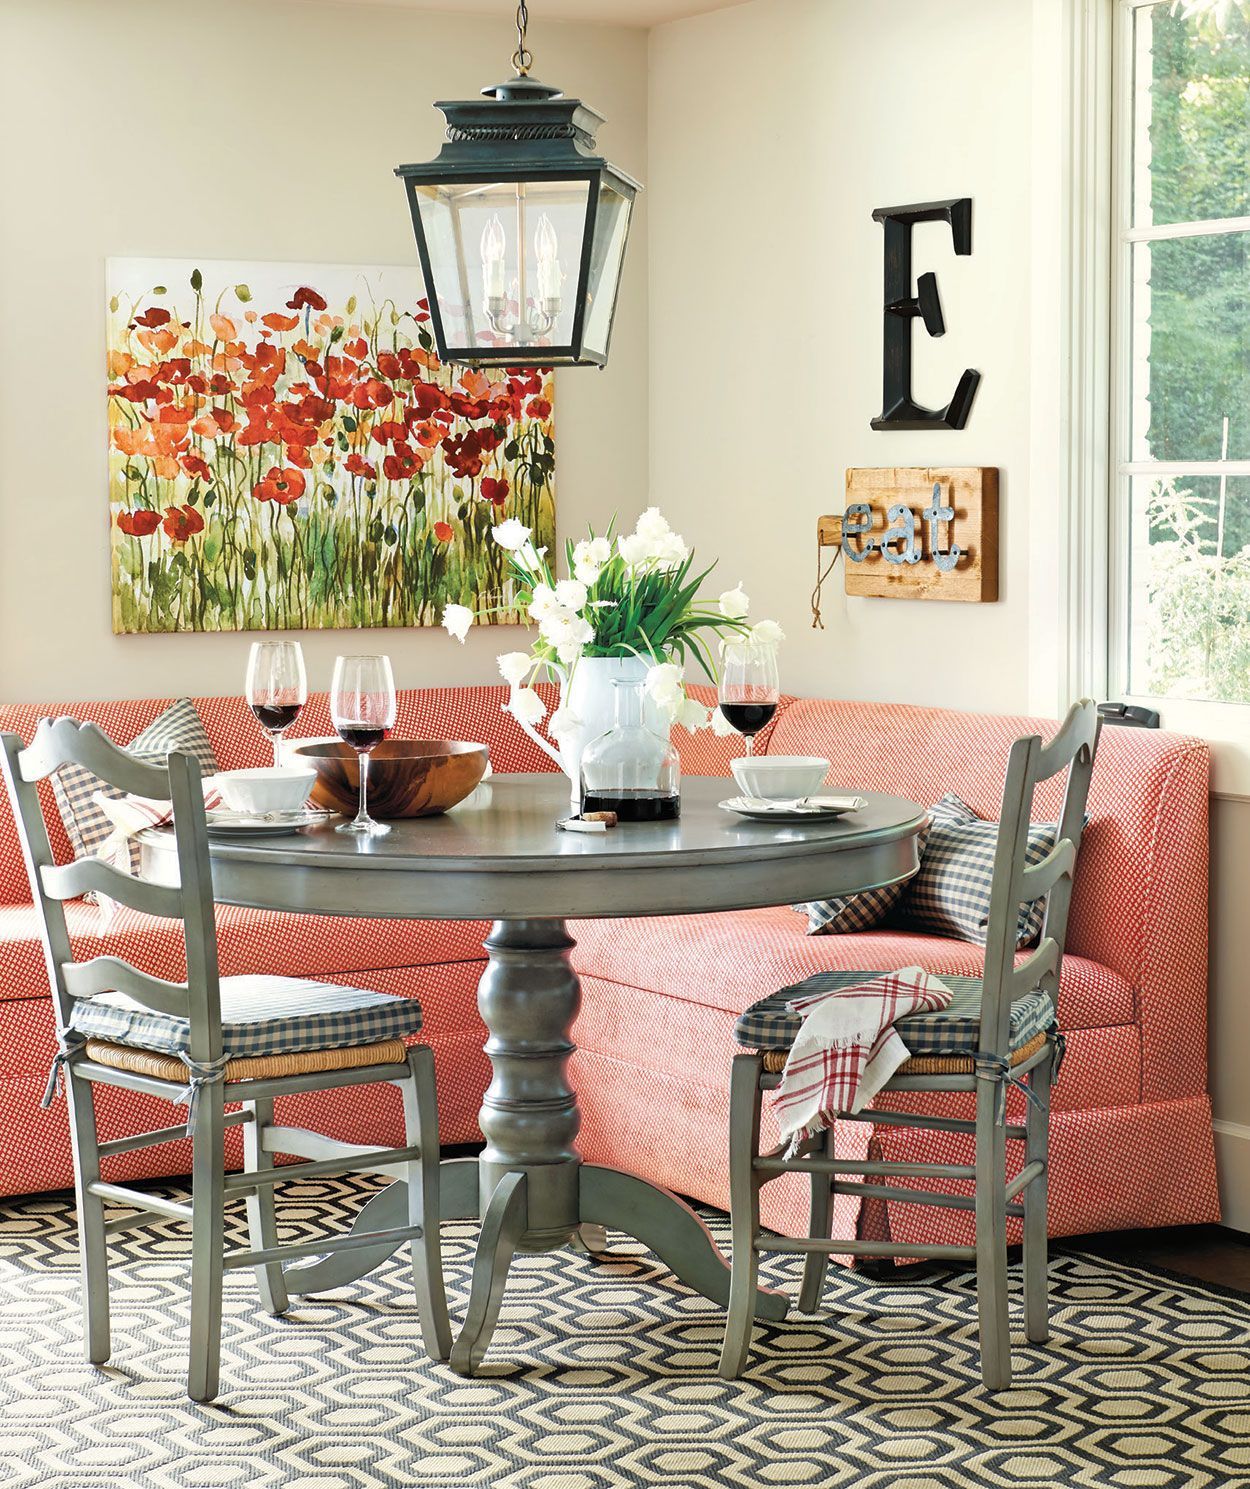 Red banquette seating  I  Click for more dining room inspiration